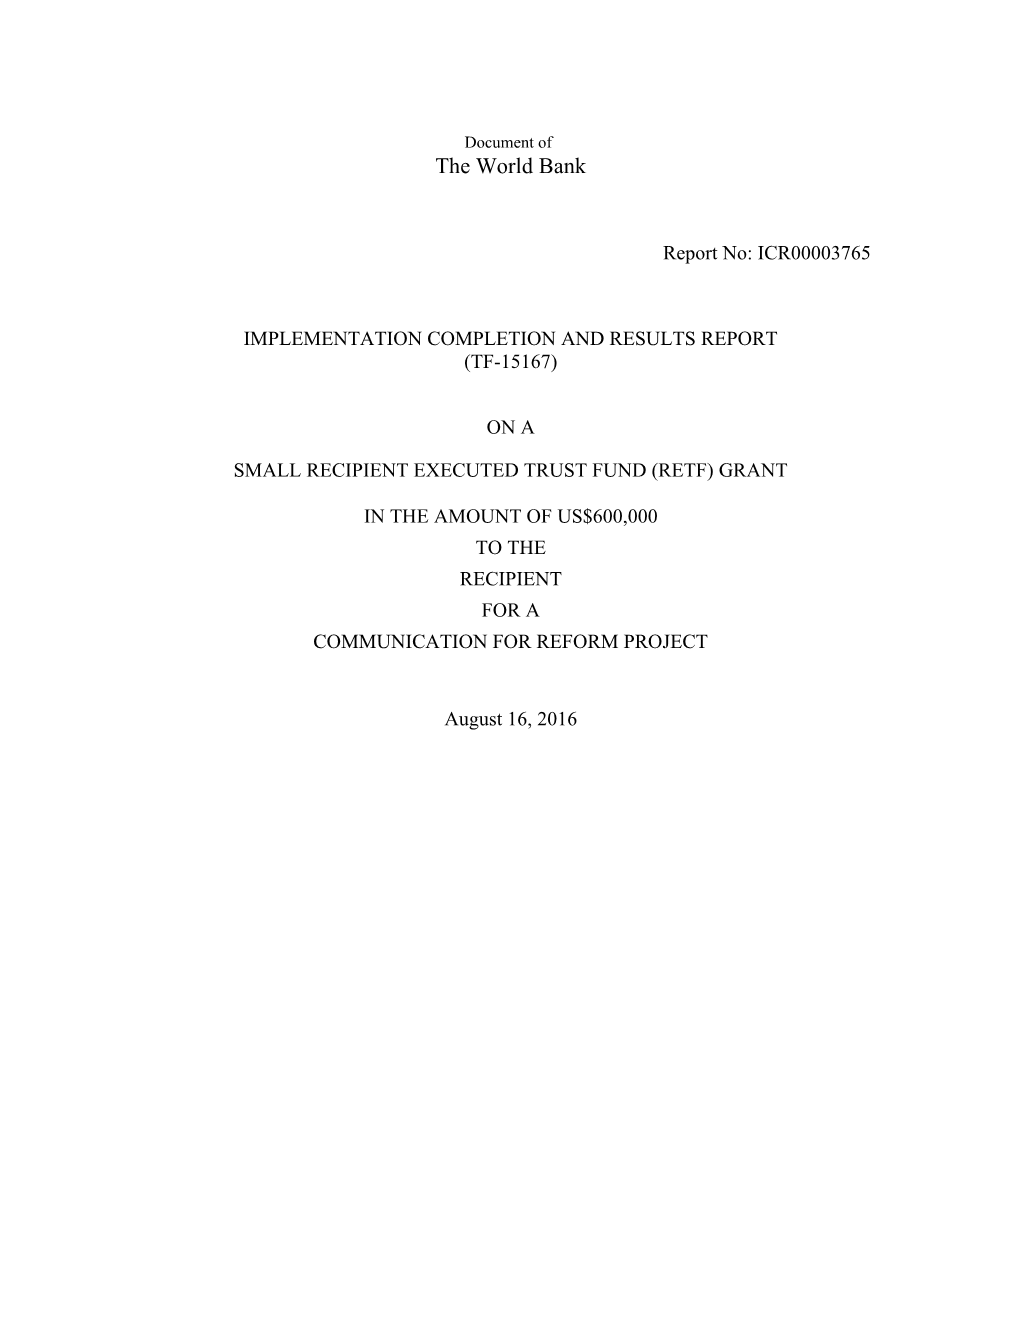 Document of the World Bank s1